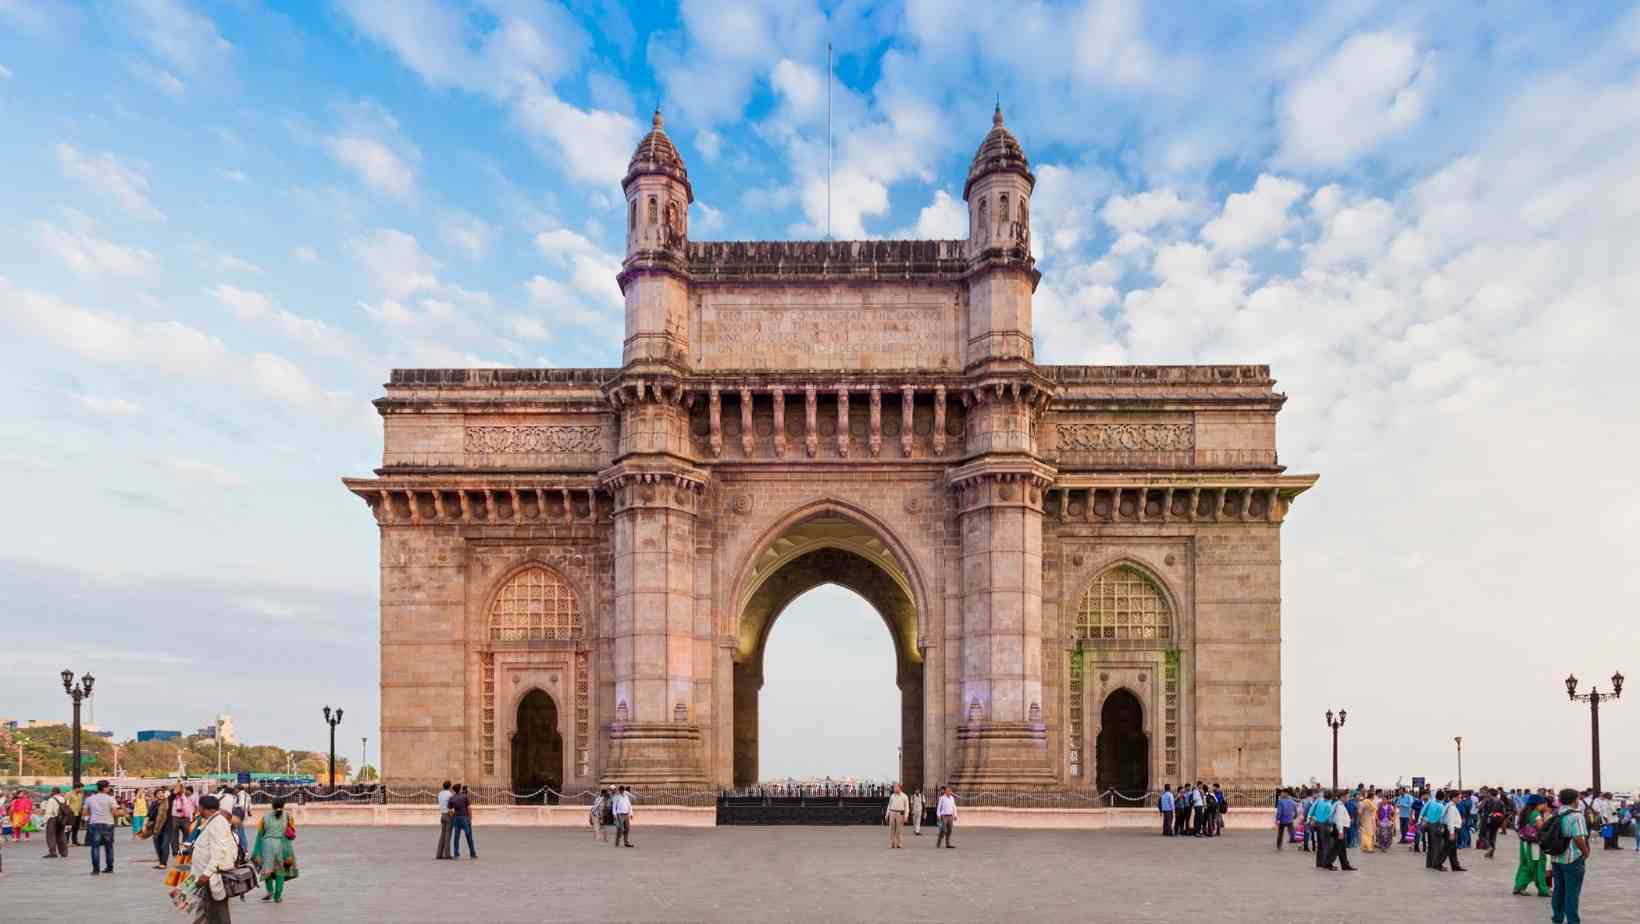 A visit to the historic gateway of India